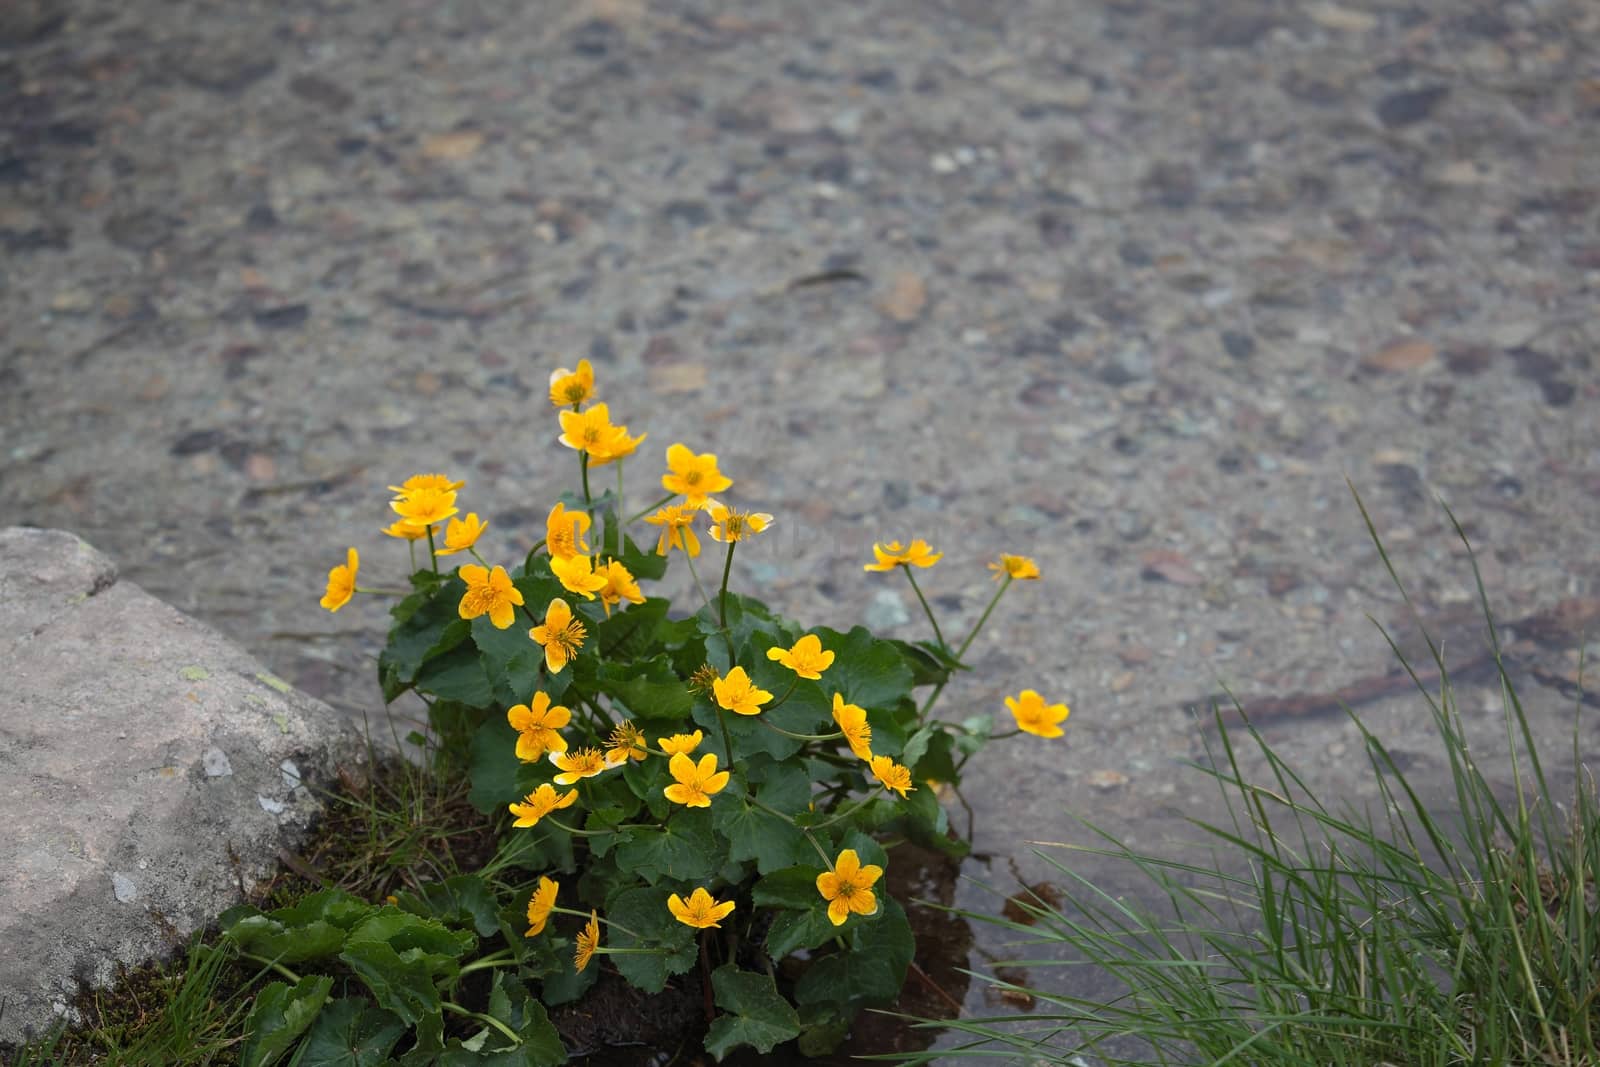 Marsh Marigolds by CWeiss